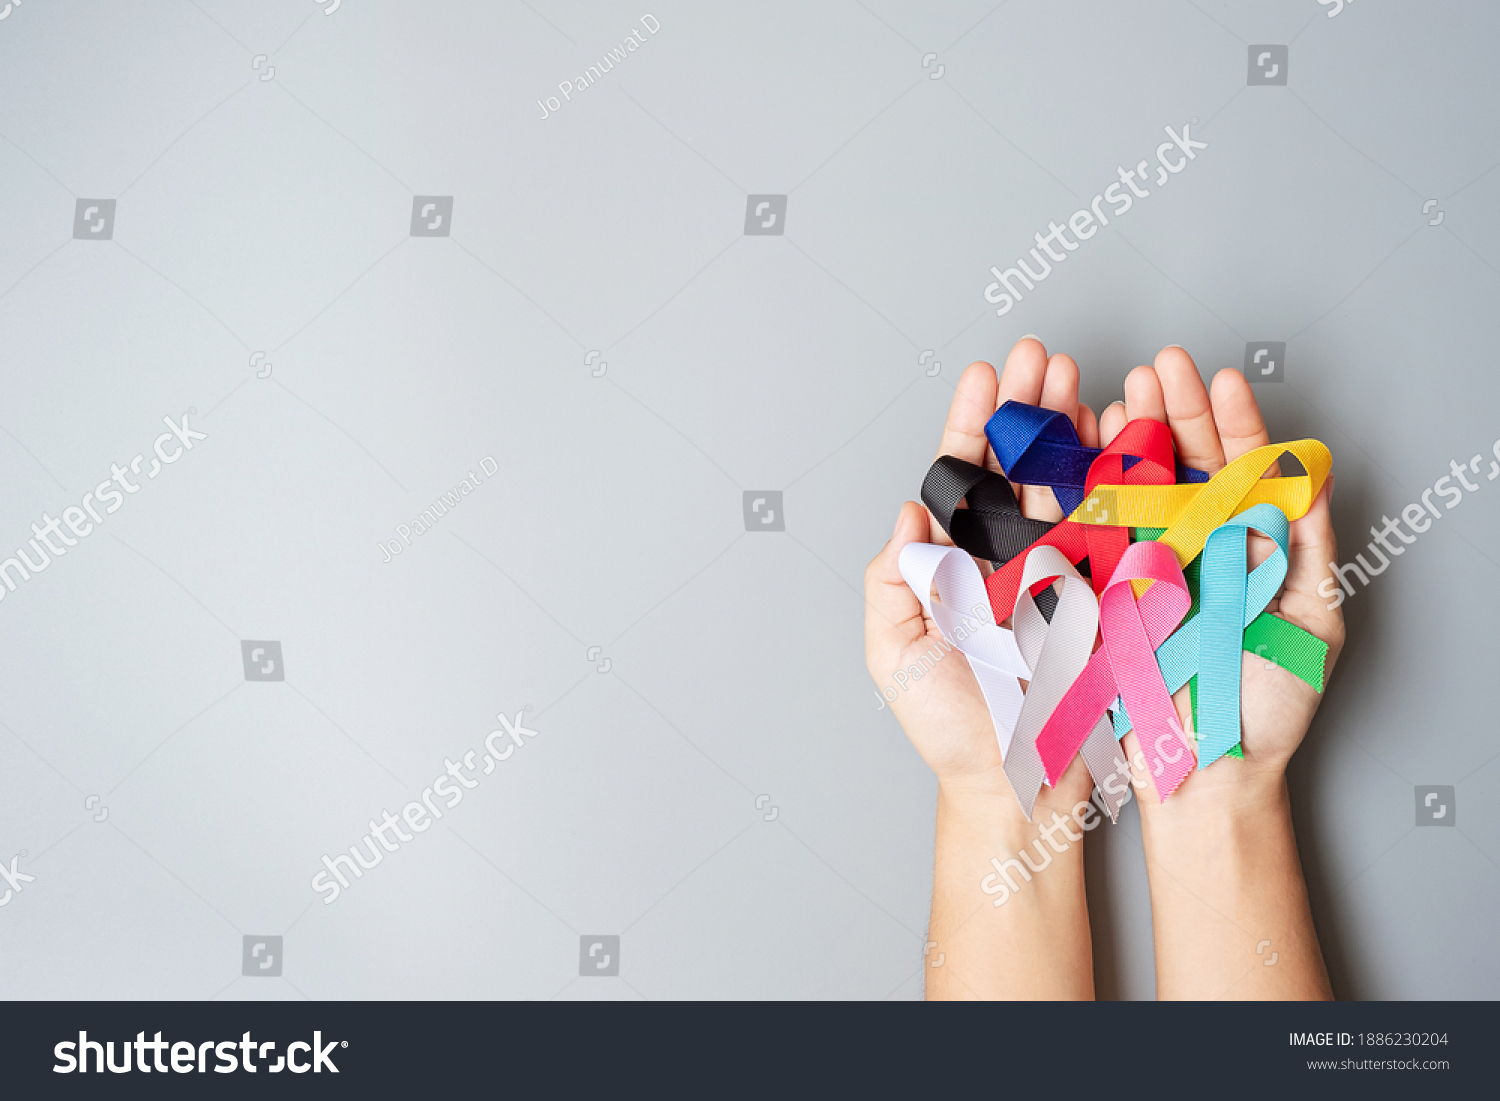 World cancer day (February 4). colorful awareness ribbons; blue, red, green, black, grey, white, pink and yellow color for supporting people living and illness. Healthcare and medical concept #1886230204